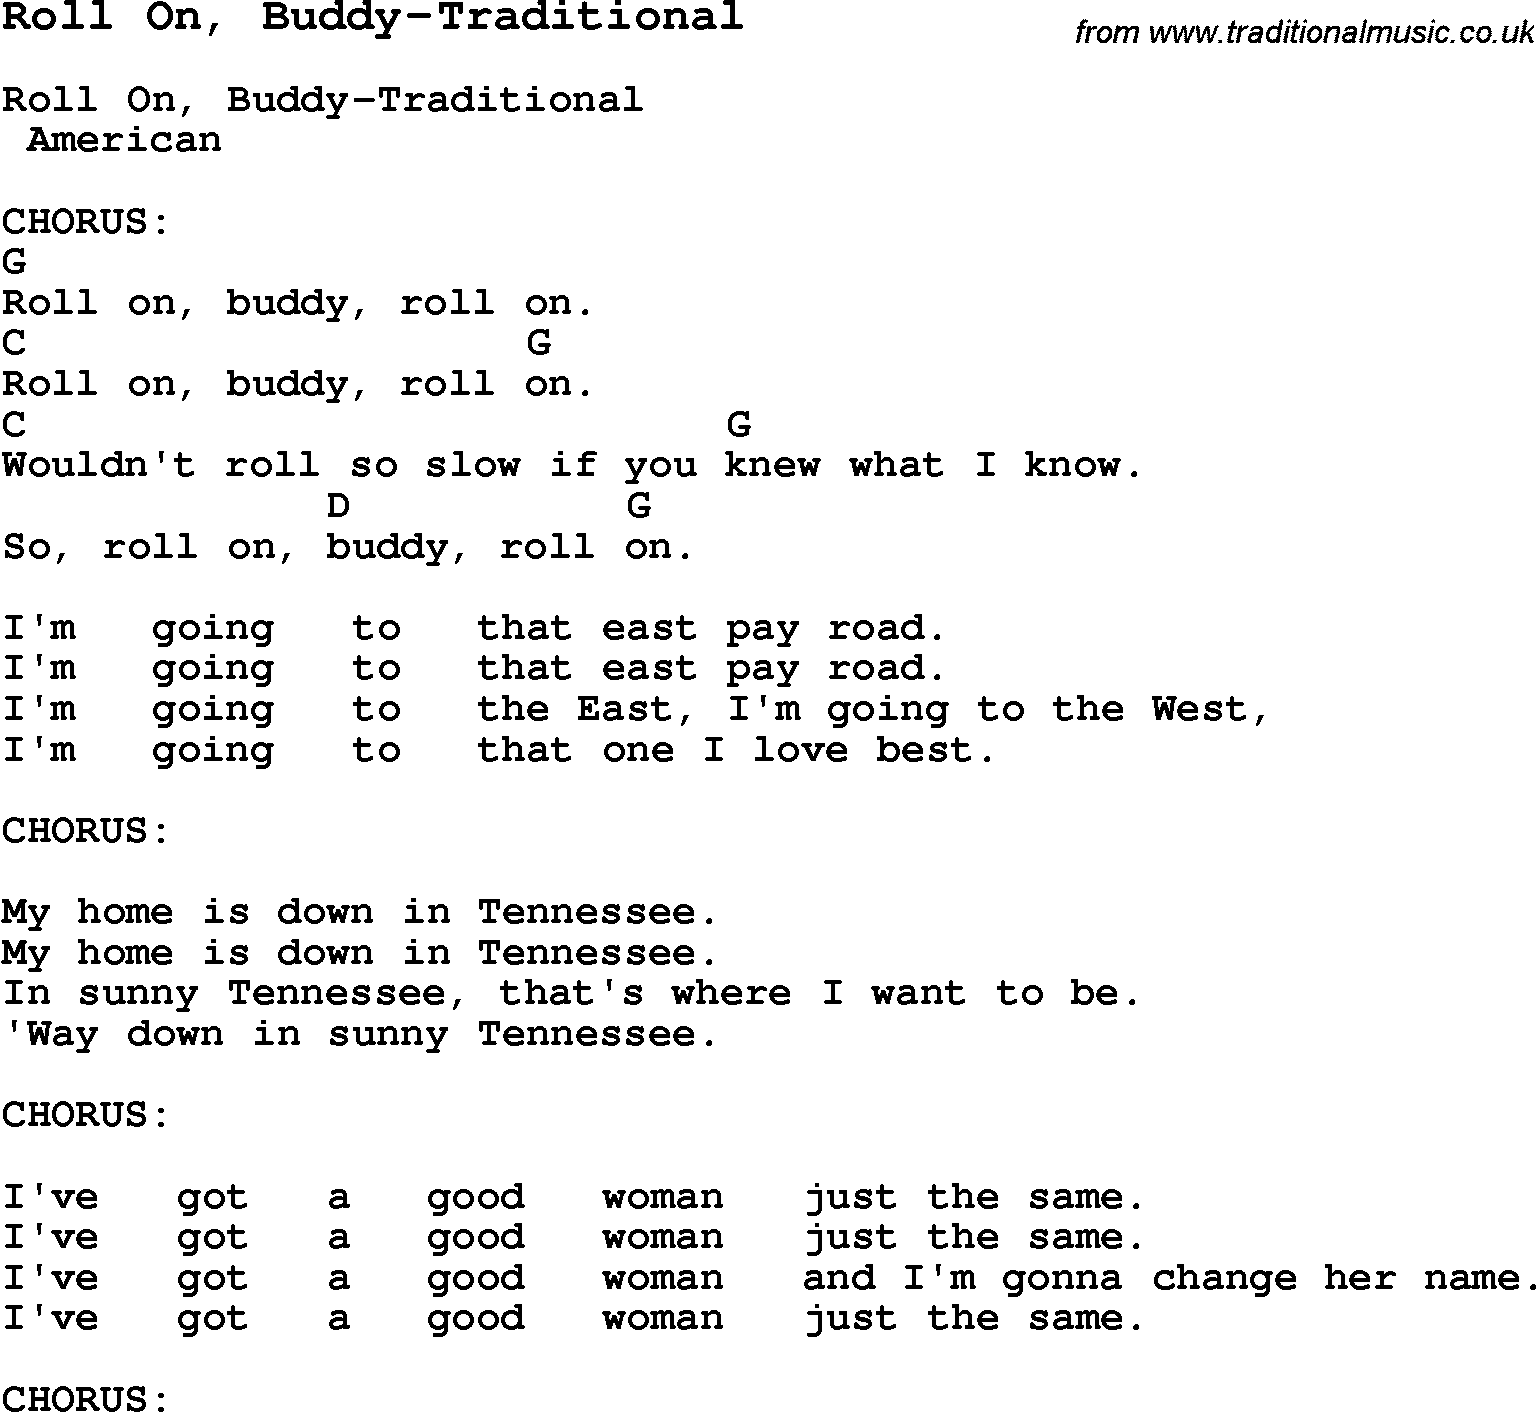 Summer-Camp Song, Roll On, Buddy-Traditional, with lyrics and chords for Ukulele, Guitar Banjo etc.